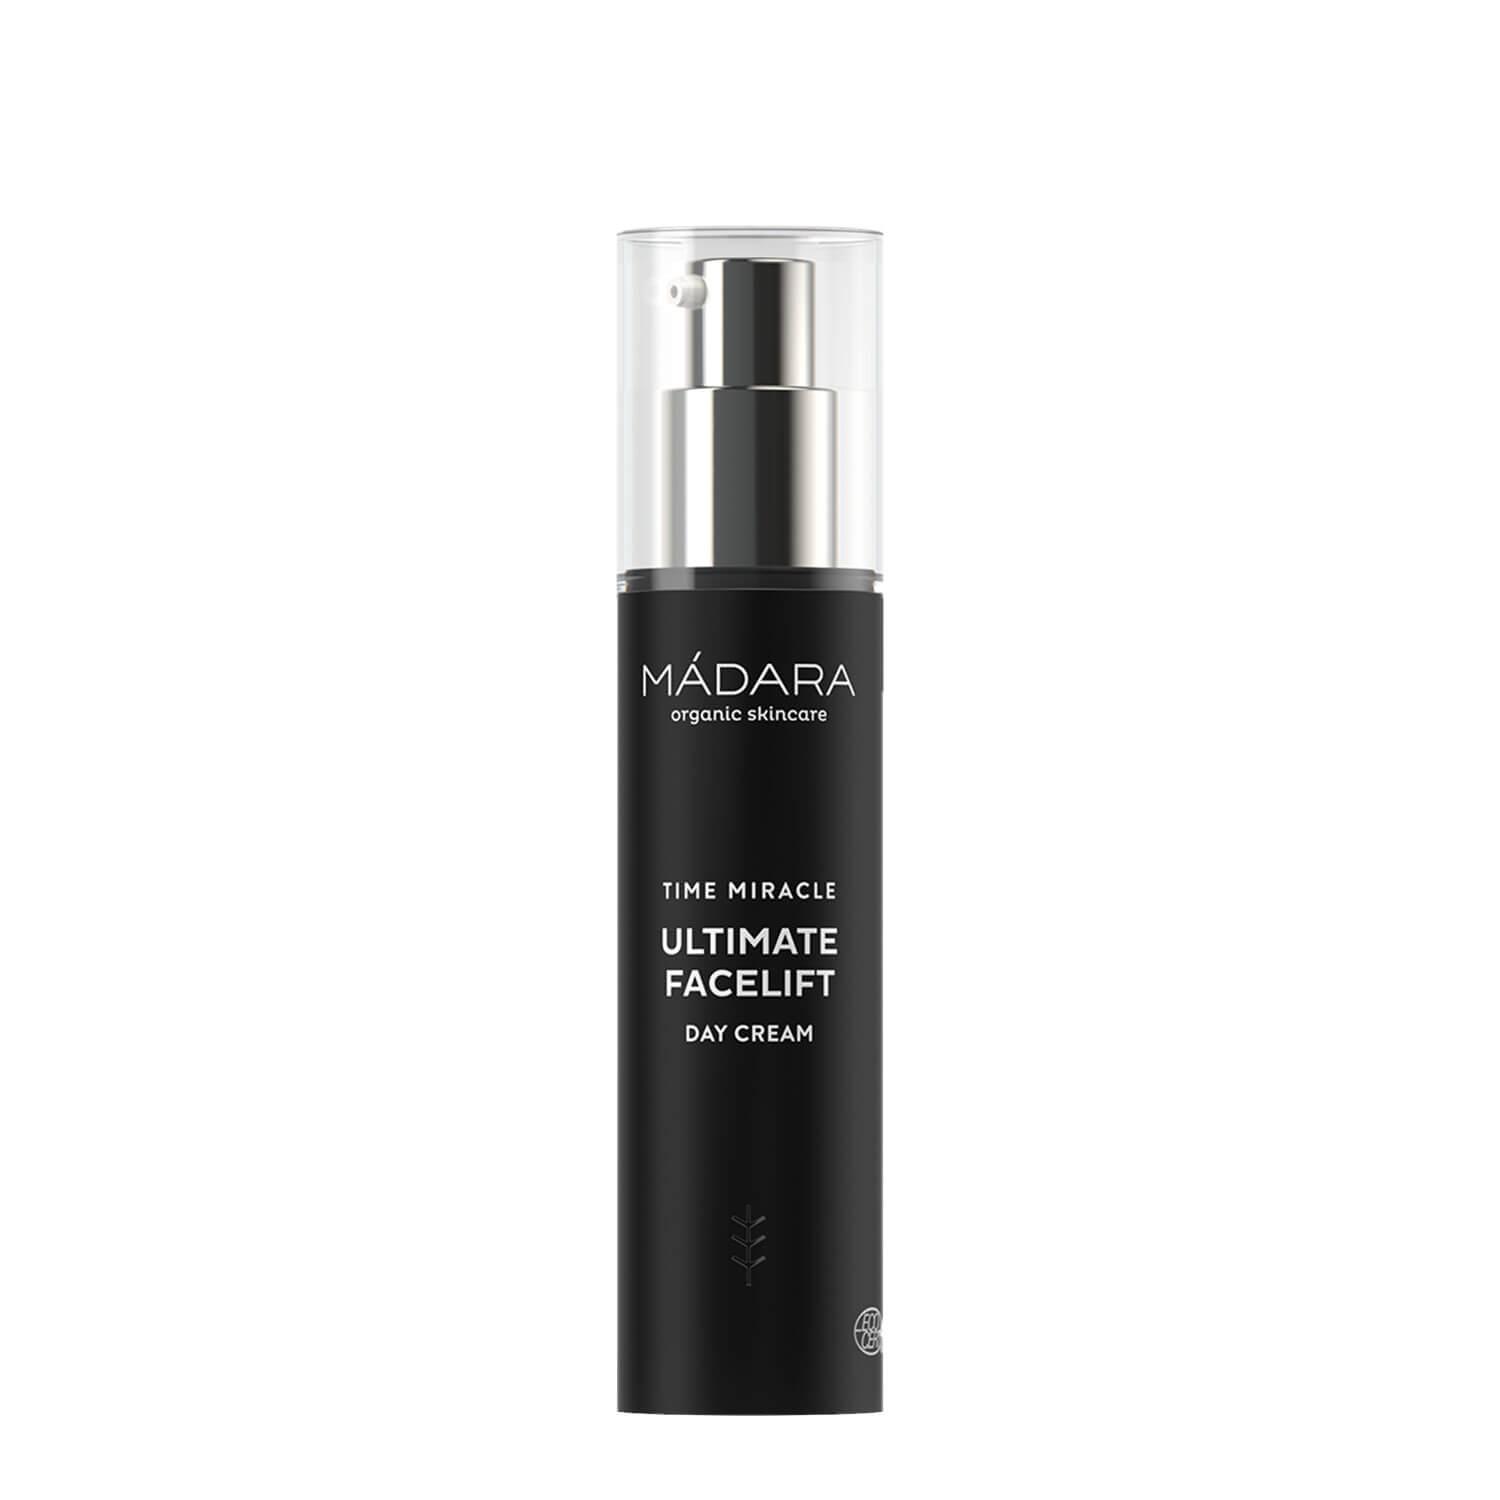 MÁDARA Care - Time Miracle Ultimate Facelift Day Cream